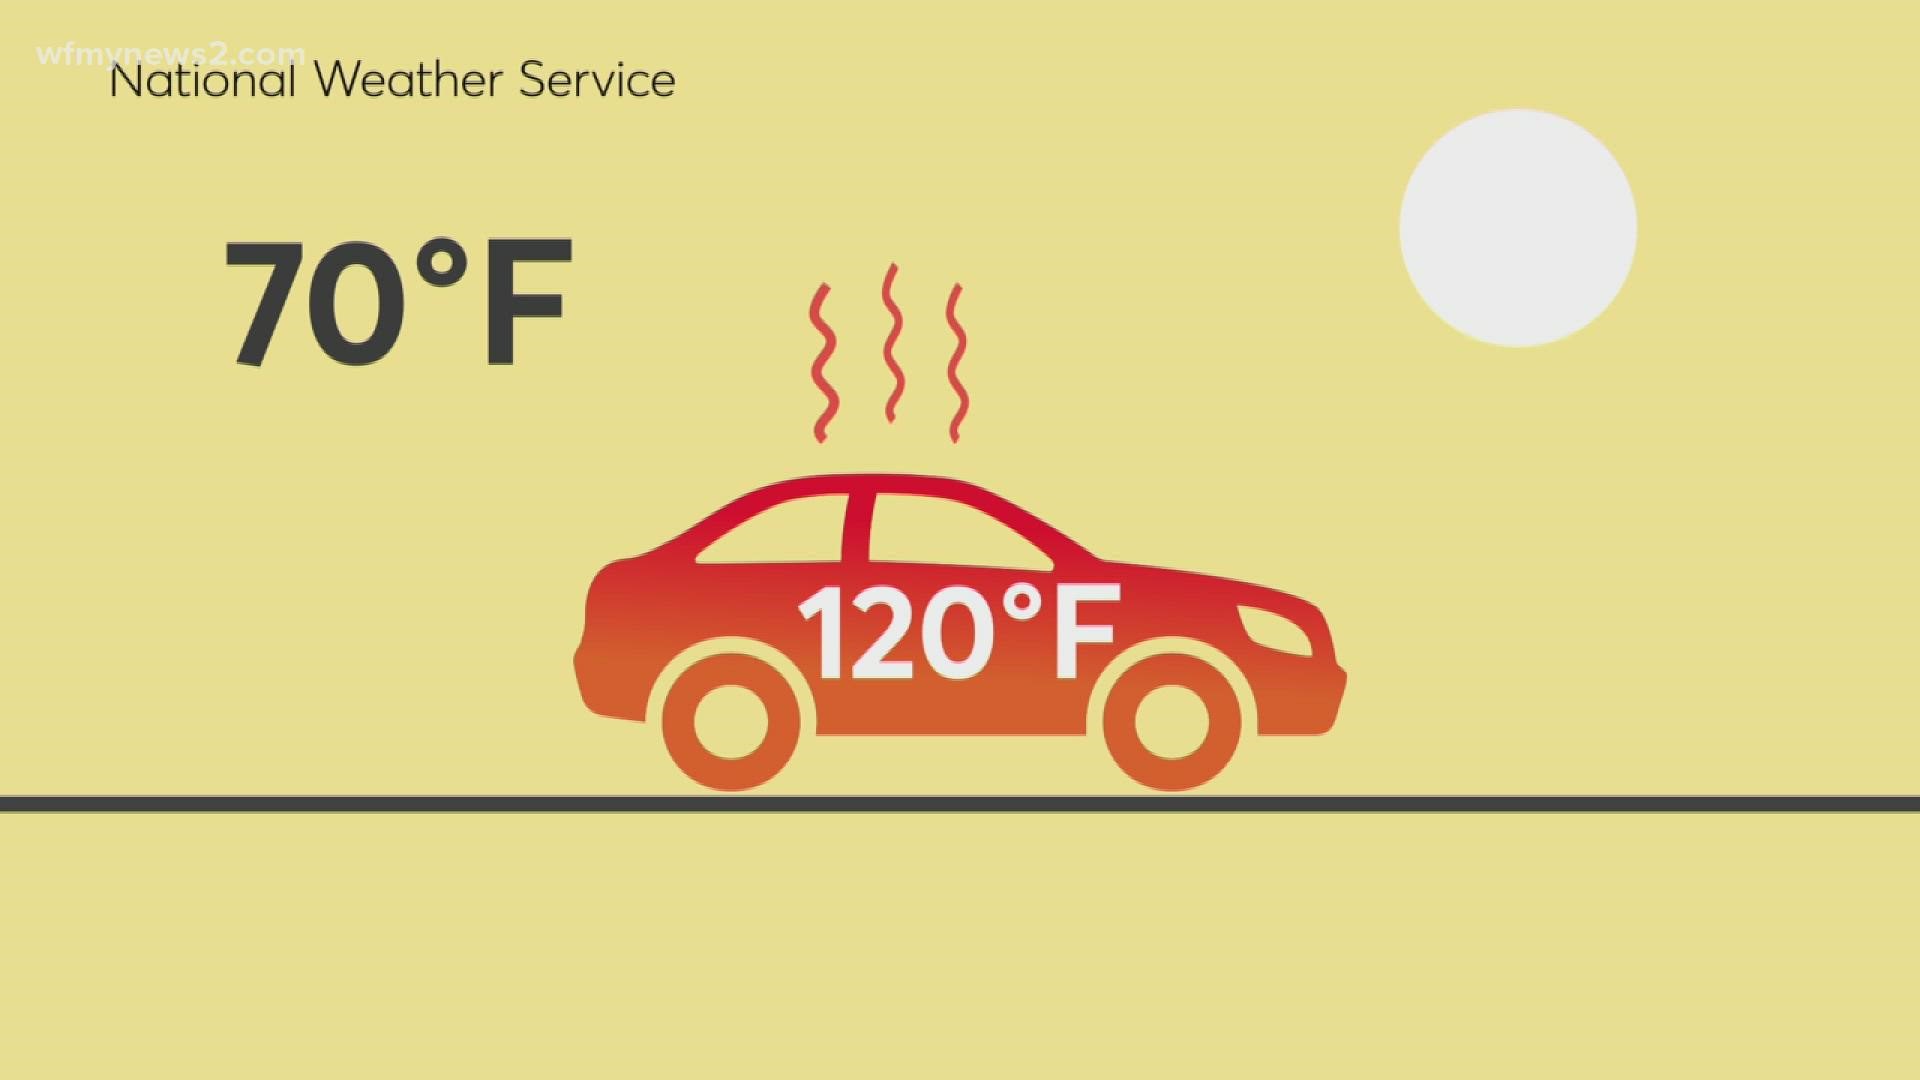 Even when the temperature outside is in the 70's, the temperature inside a car can quickly heat to over 120 degrees